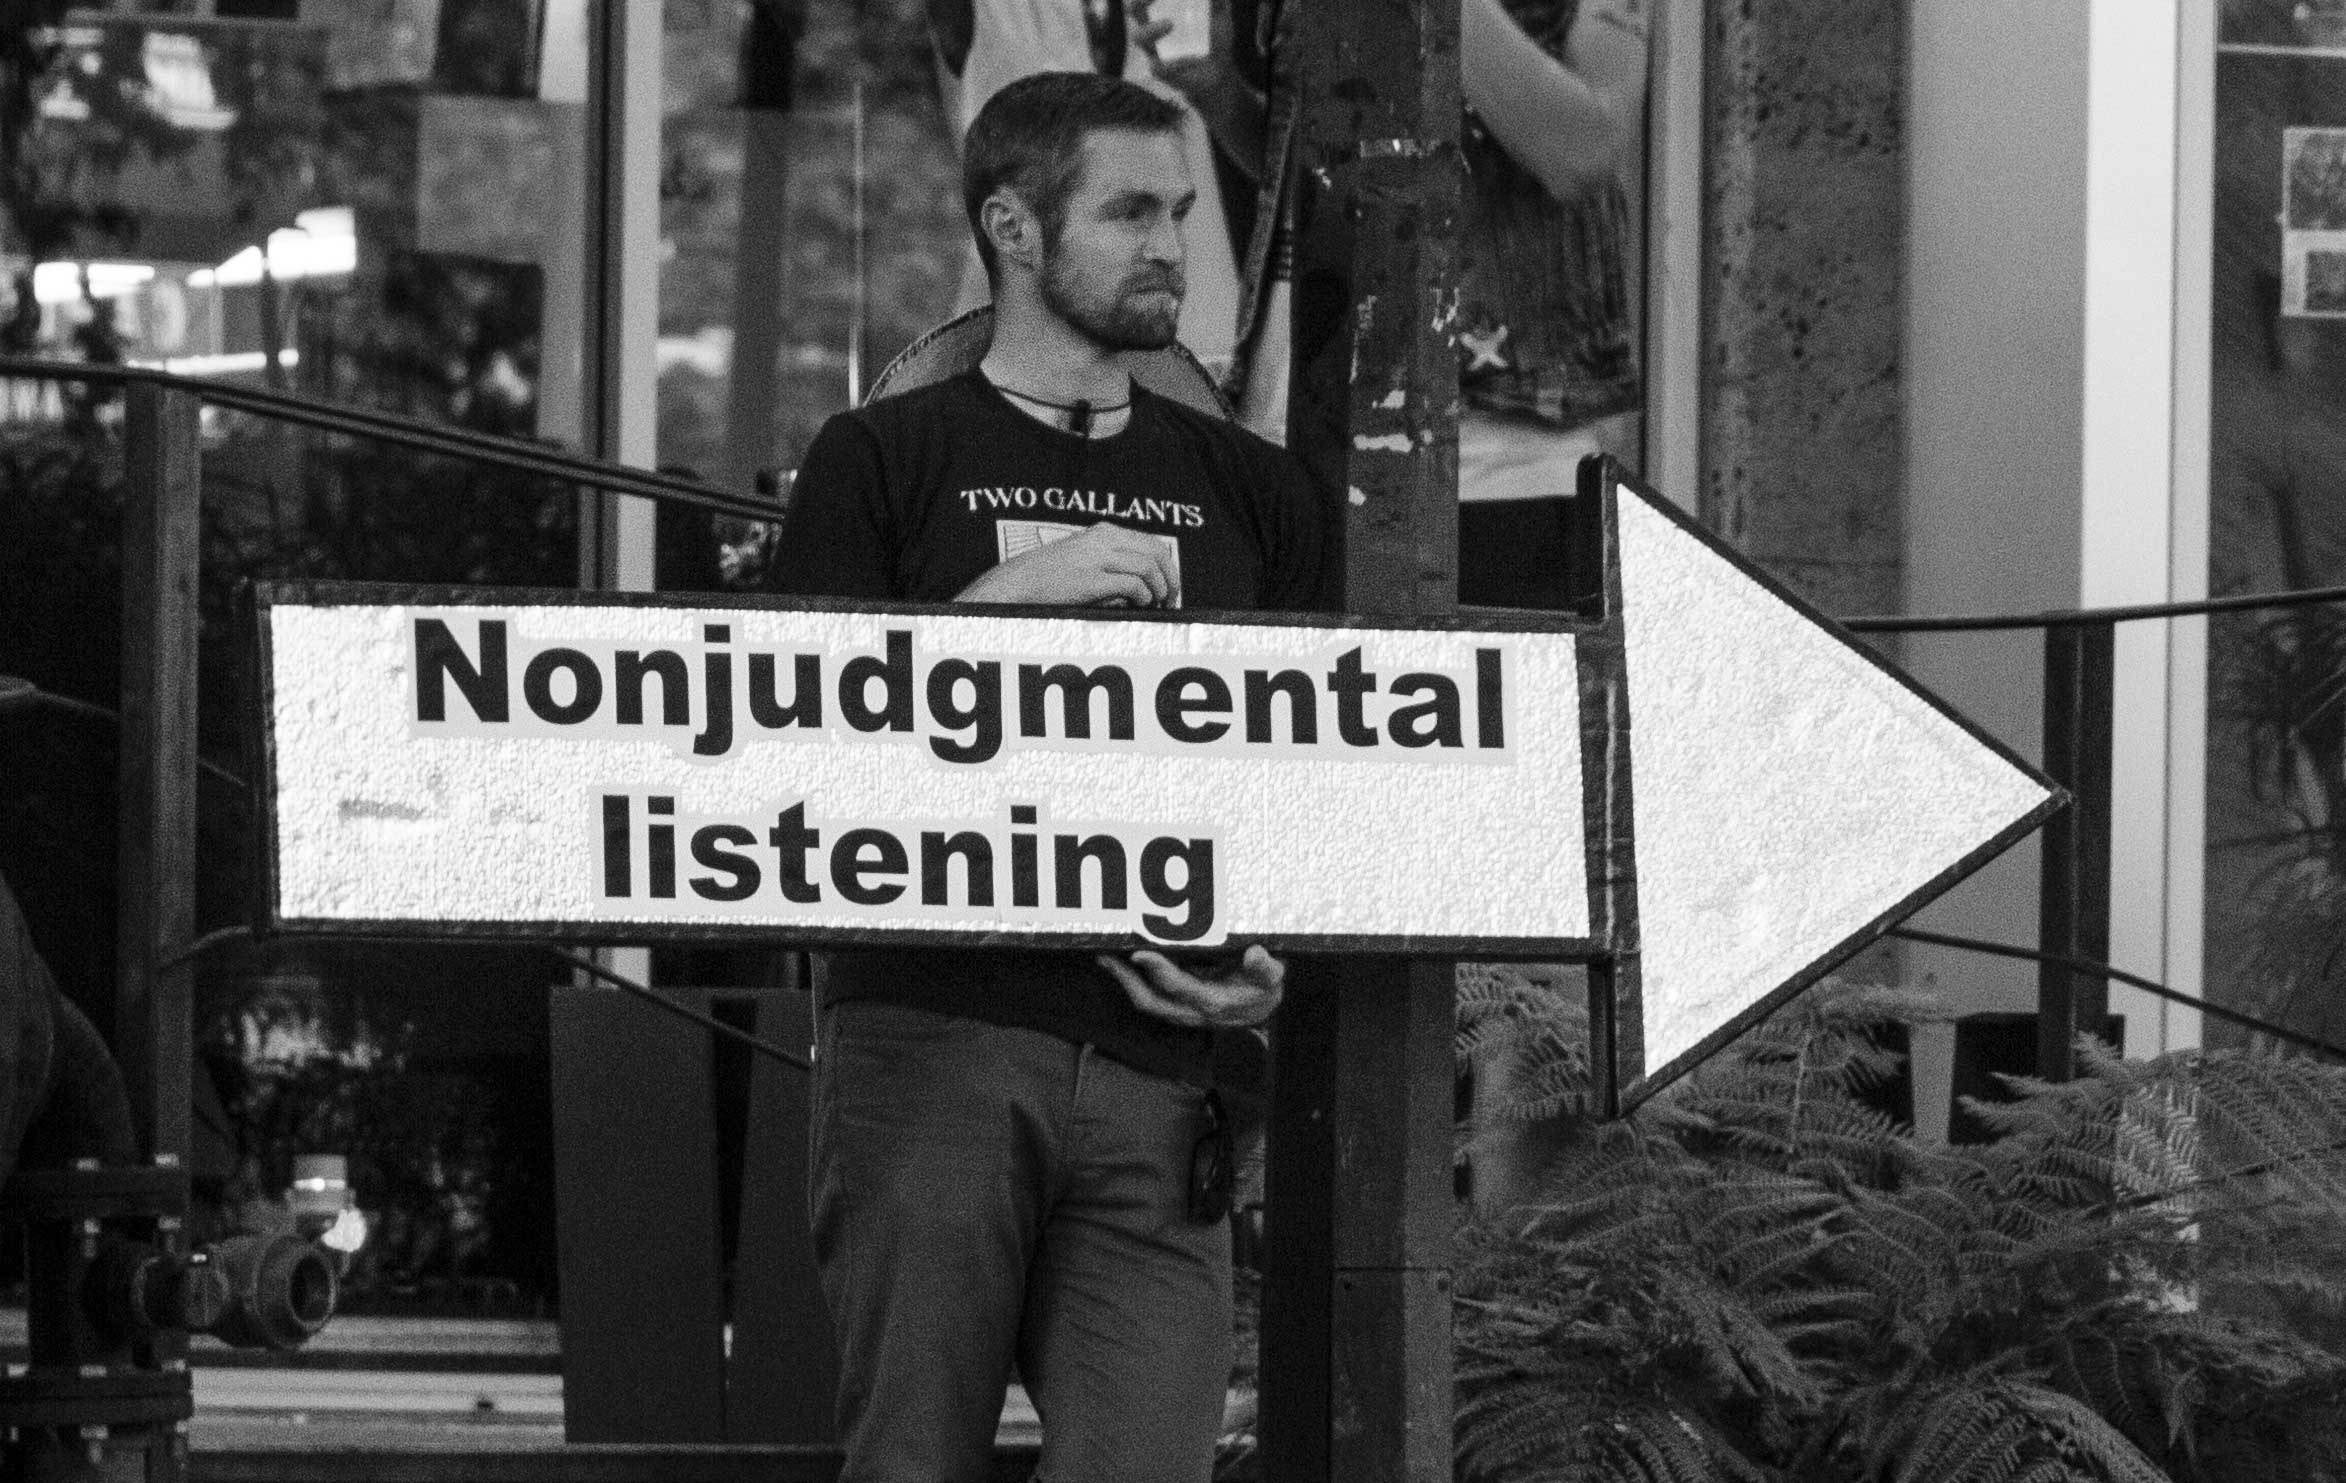 man with sign "Nonjudgmental listening